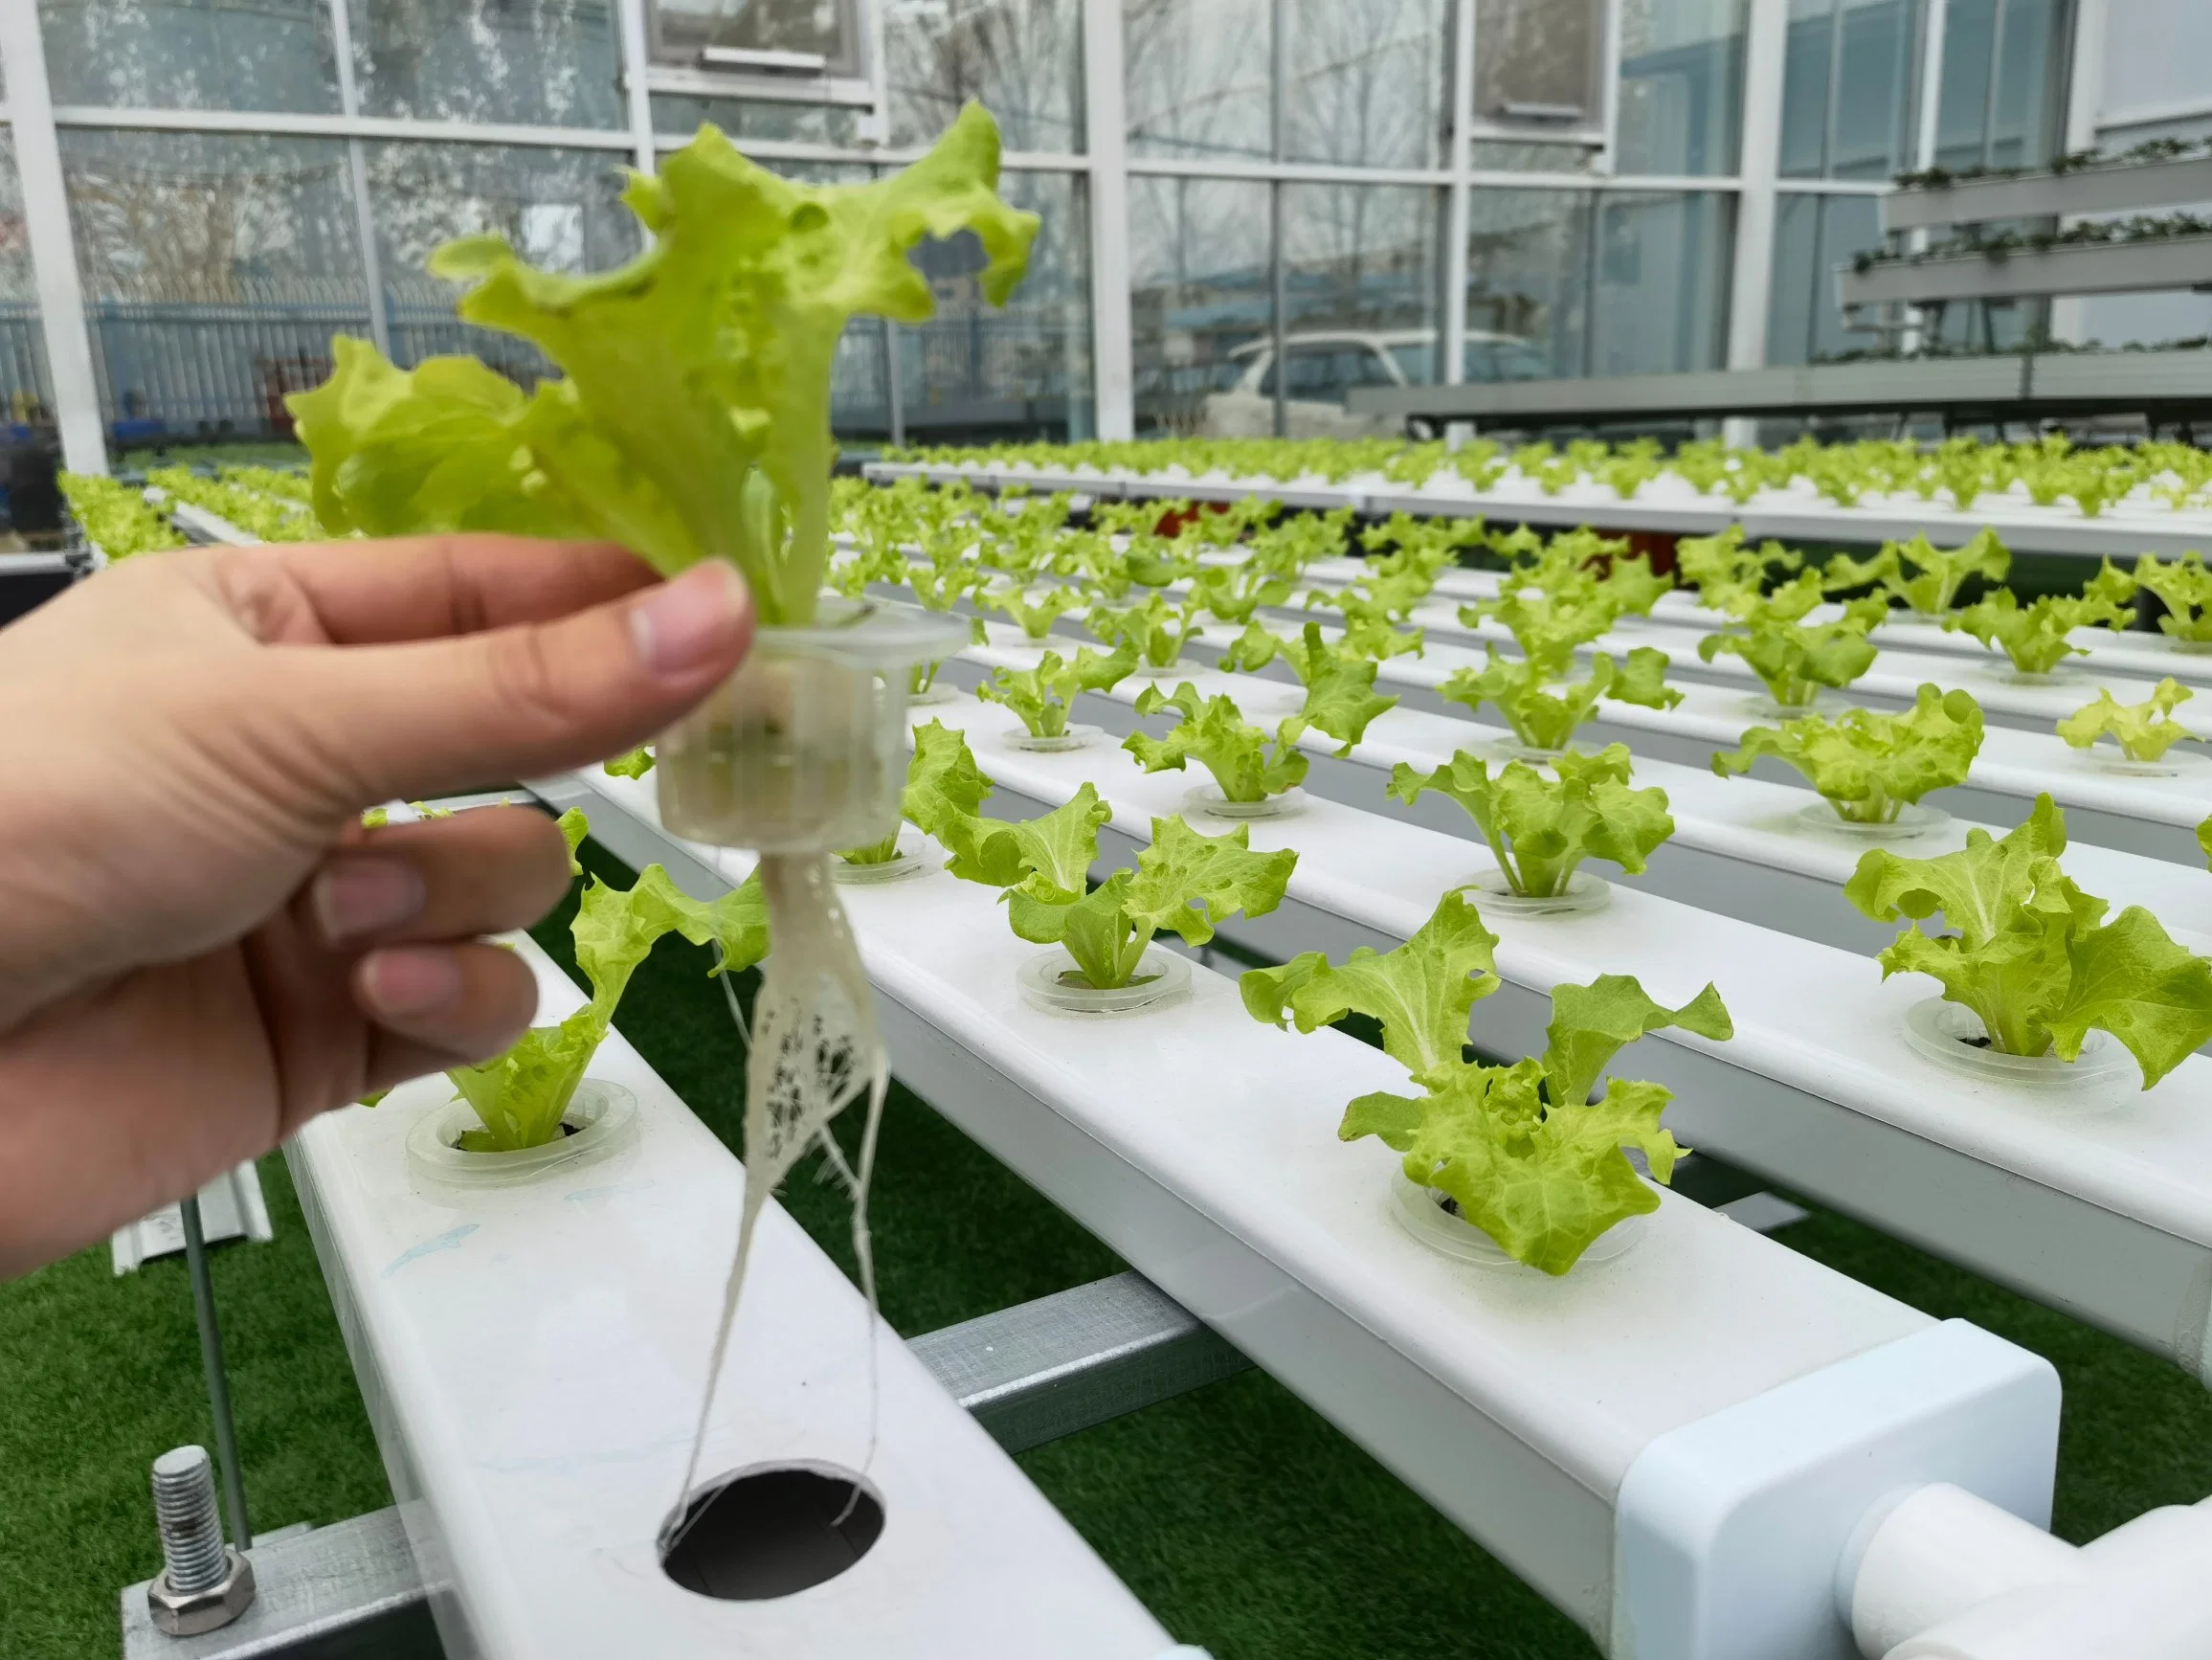 Agriculture Vertical Hydroponics Systems Farm Agriculture Nft Hydroponic Channel